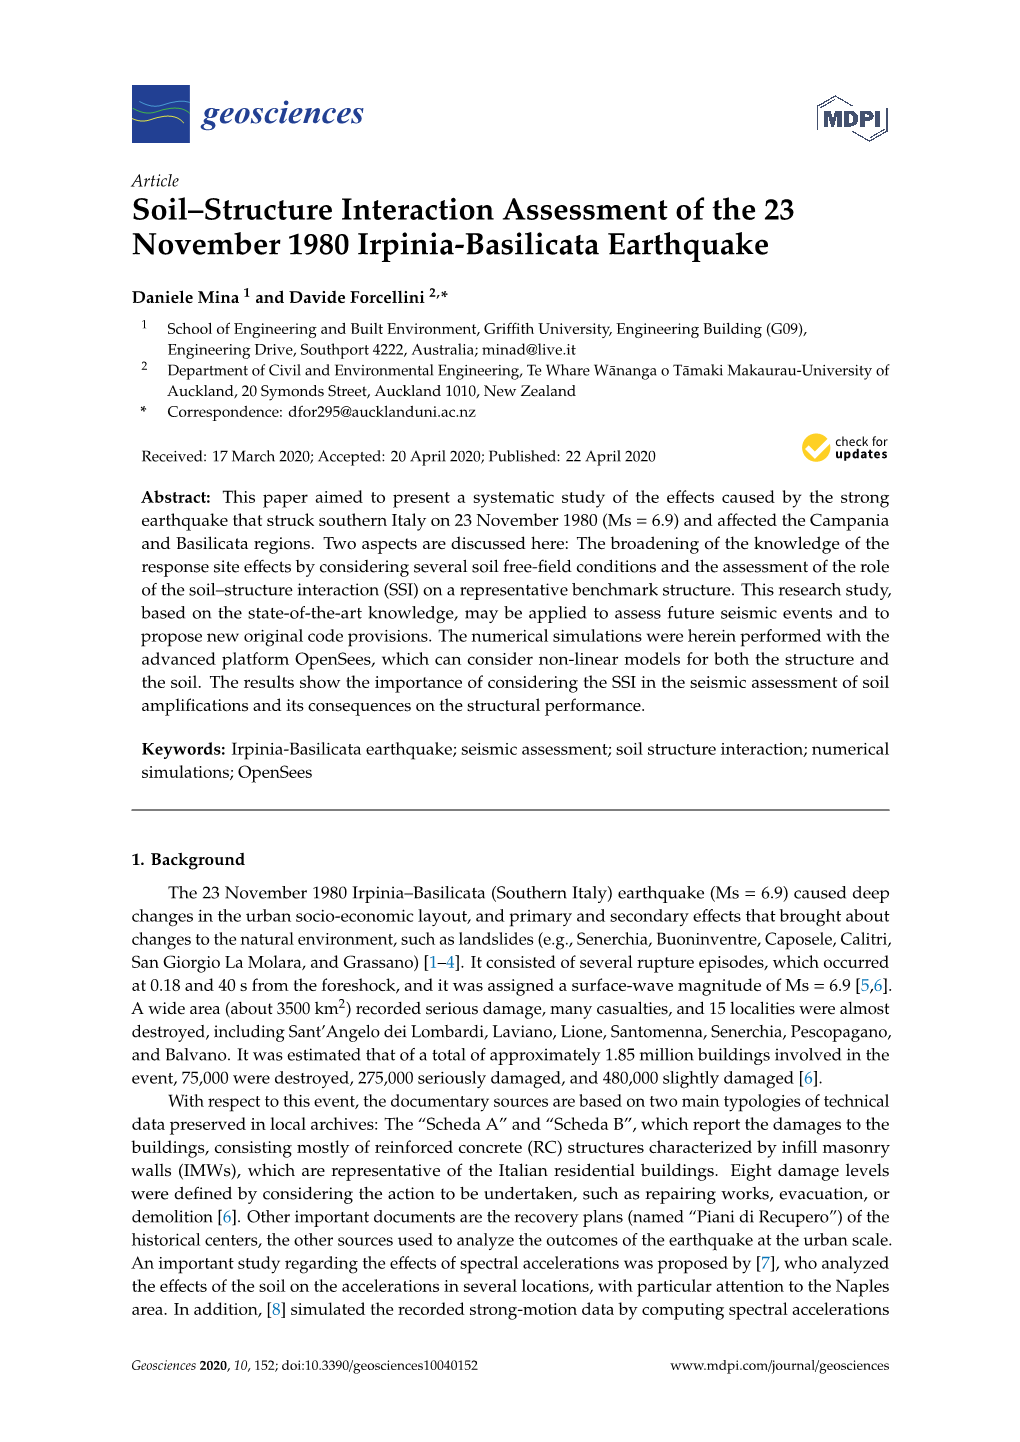 Soil–Structure Interaction Assessment of the 23 November 1980 Irpinia-Basilicata Earthquake